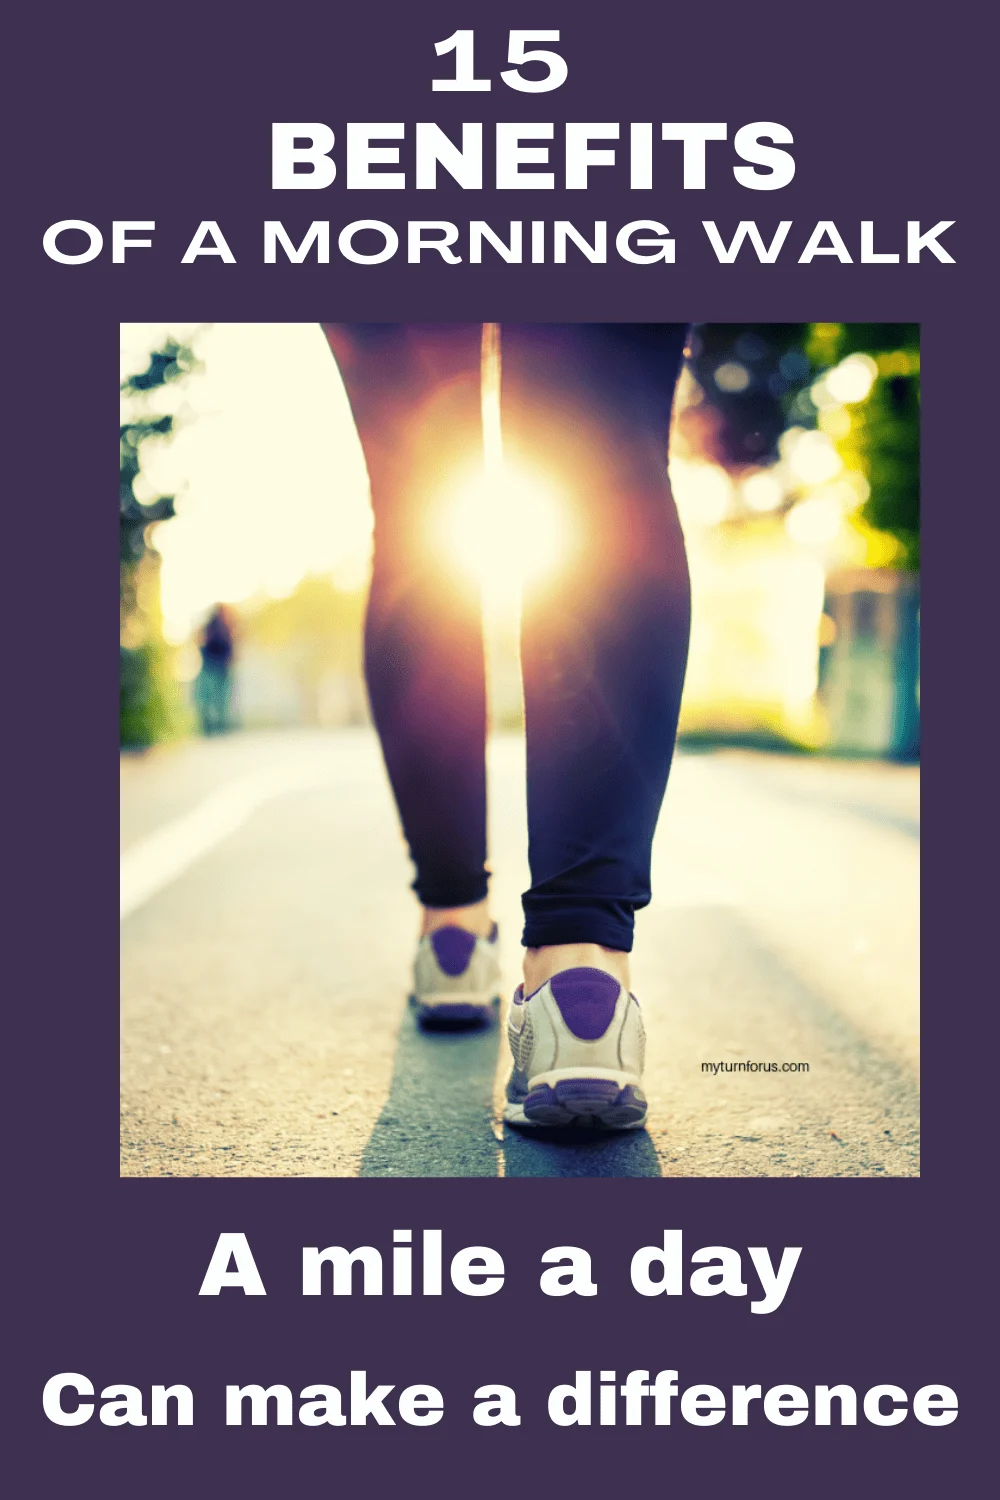 Benefits of a morning walk-walking a mile a day